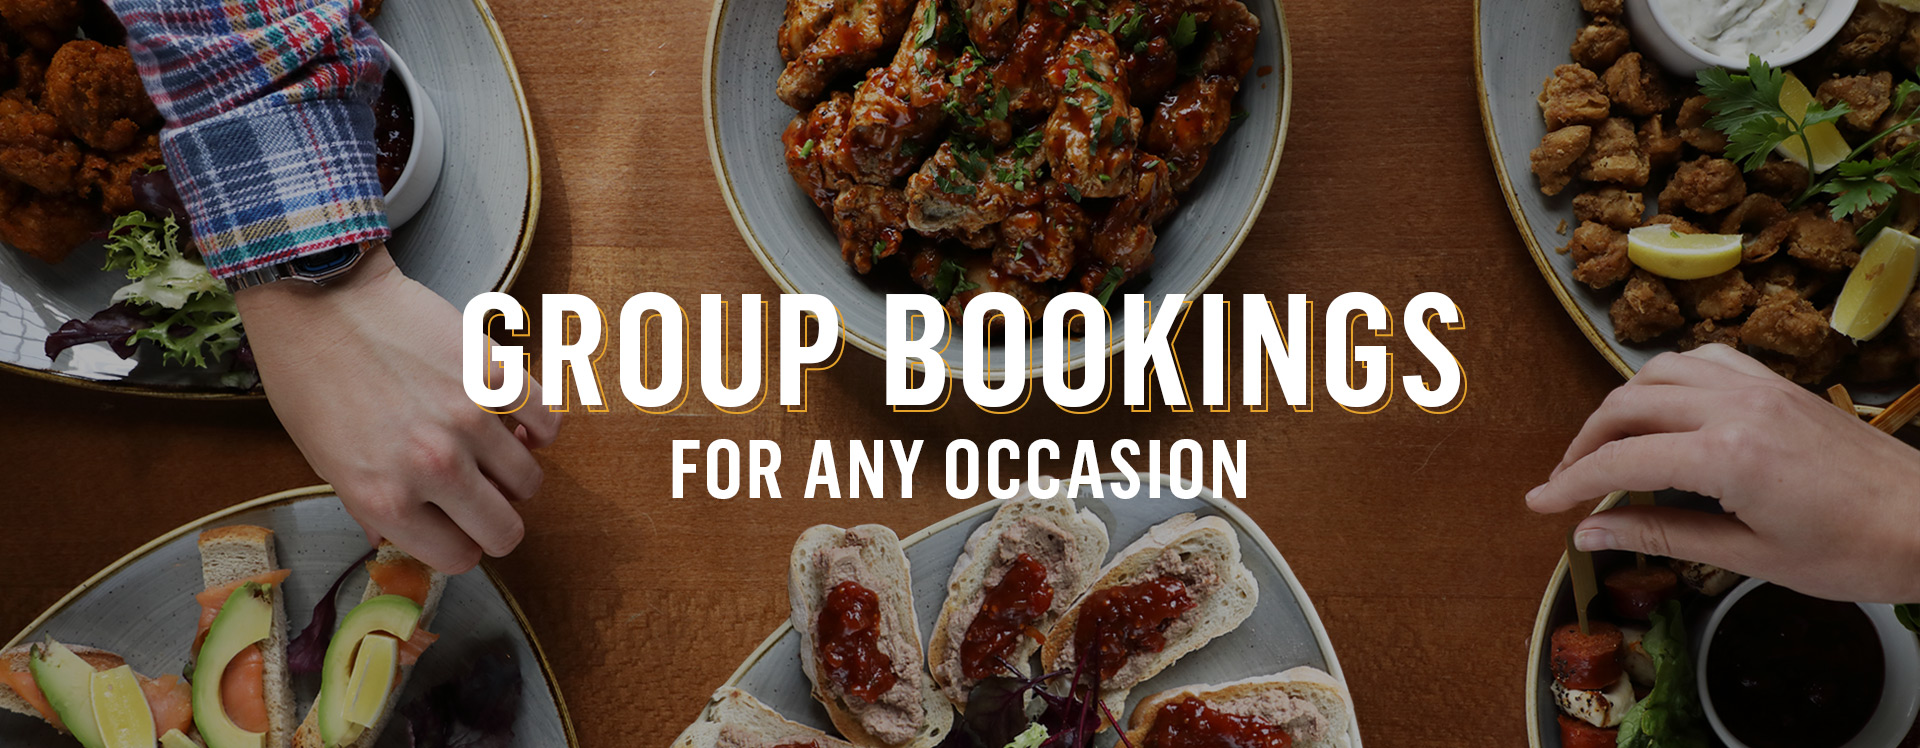 Group Bookings at Deacon Brodies Tavern